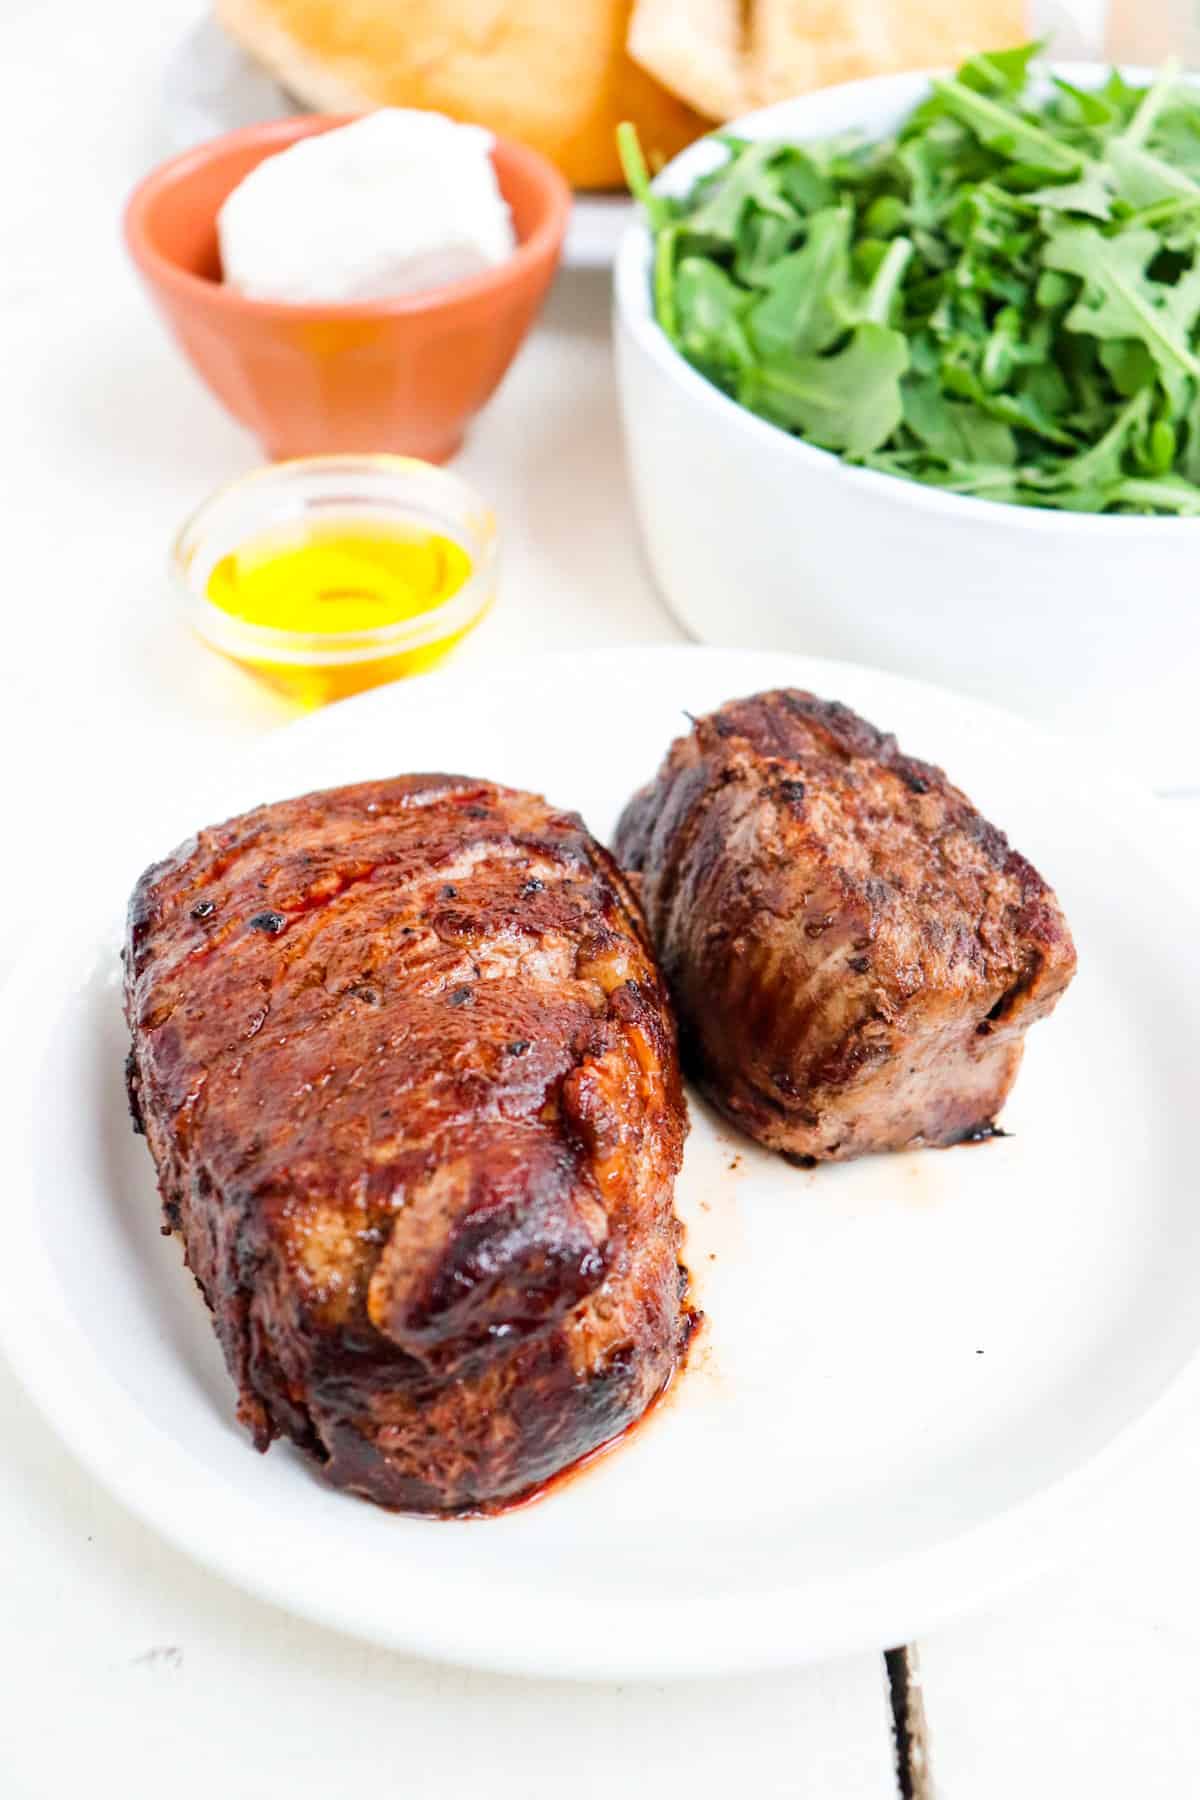 two cooked sirloins on a plate with additional ingredients in the background.